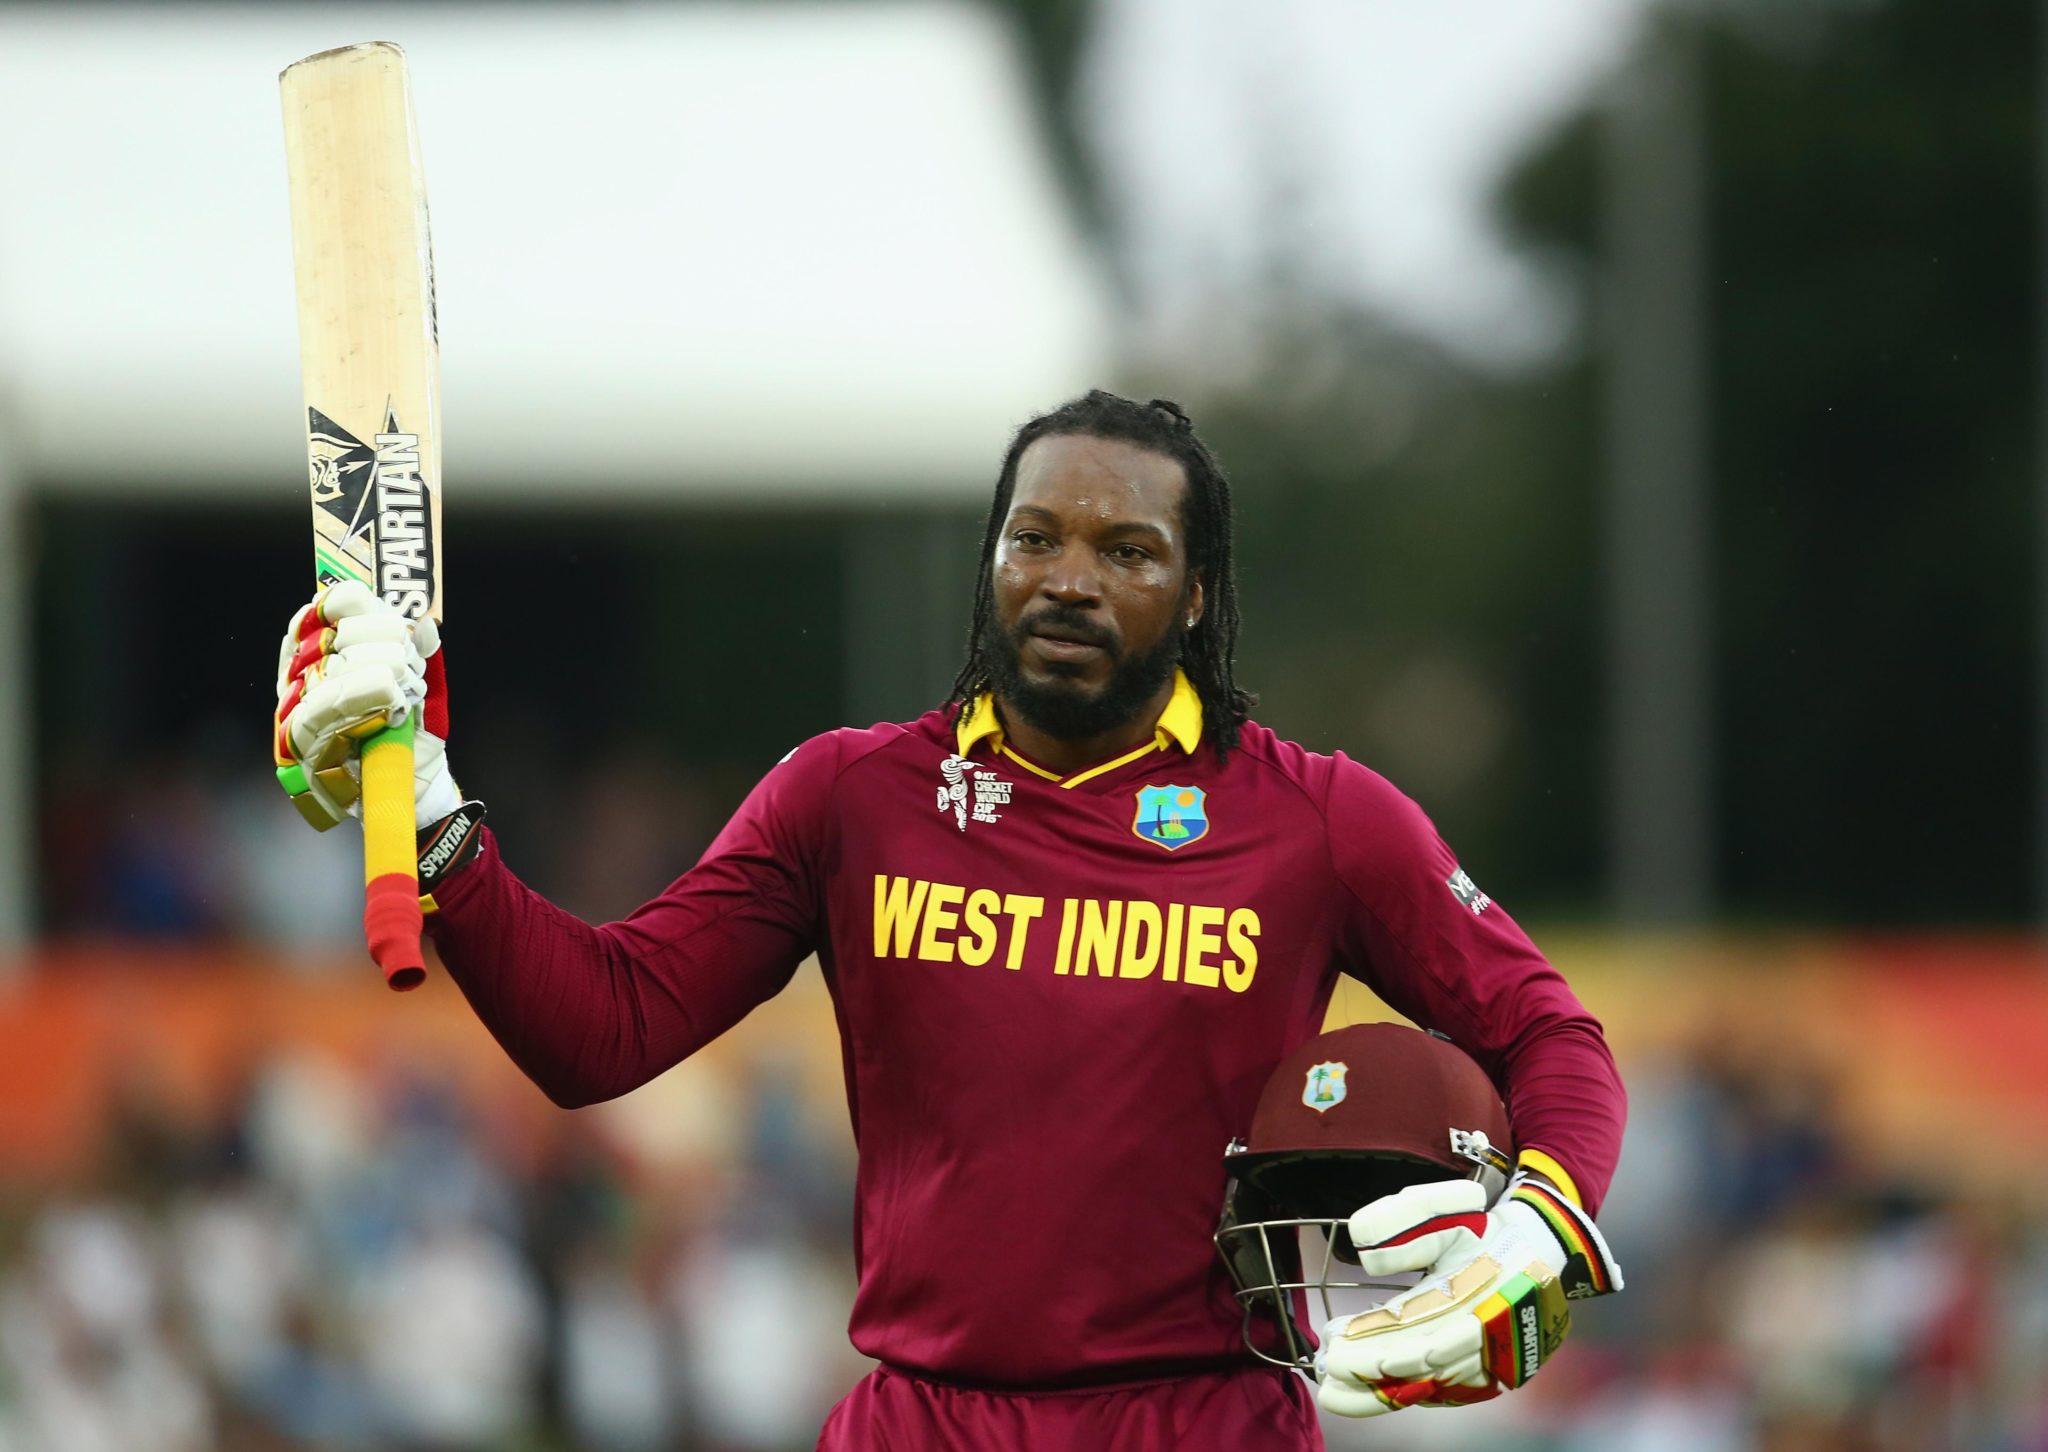 greatest t20 batsmen of all time- chris gayle in west indies jersey holding the bat